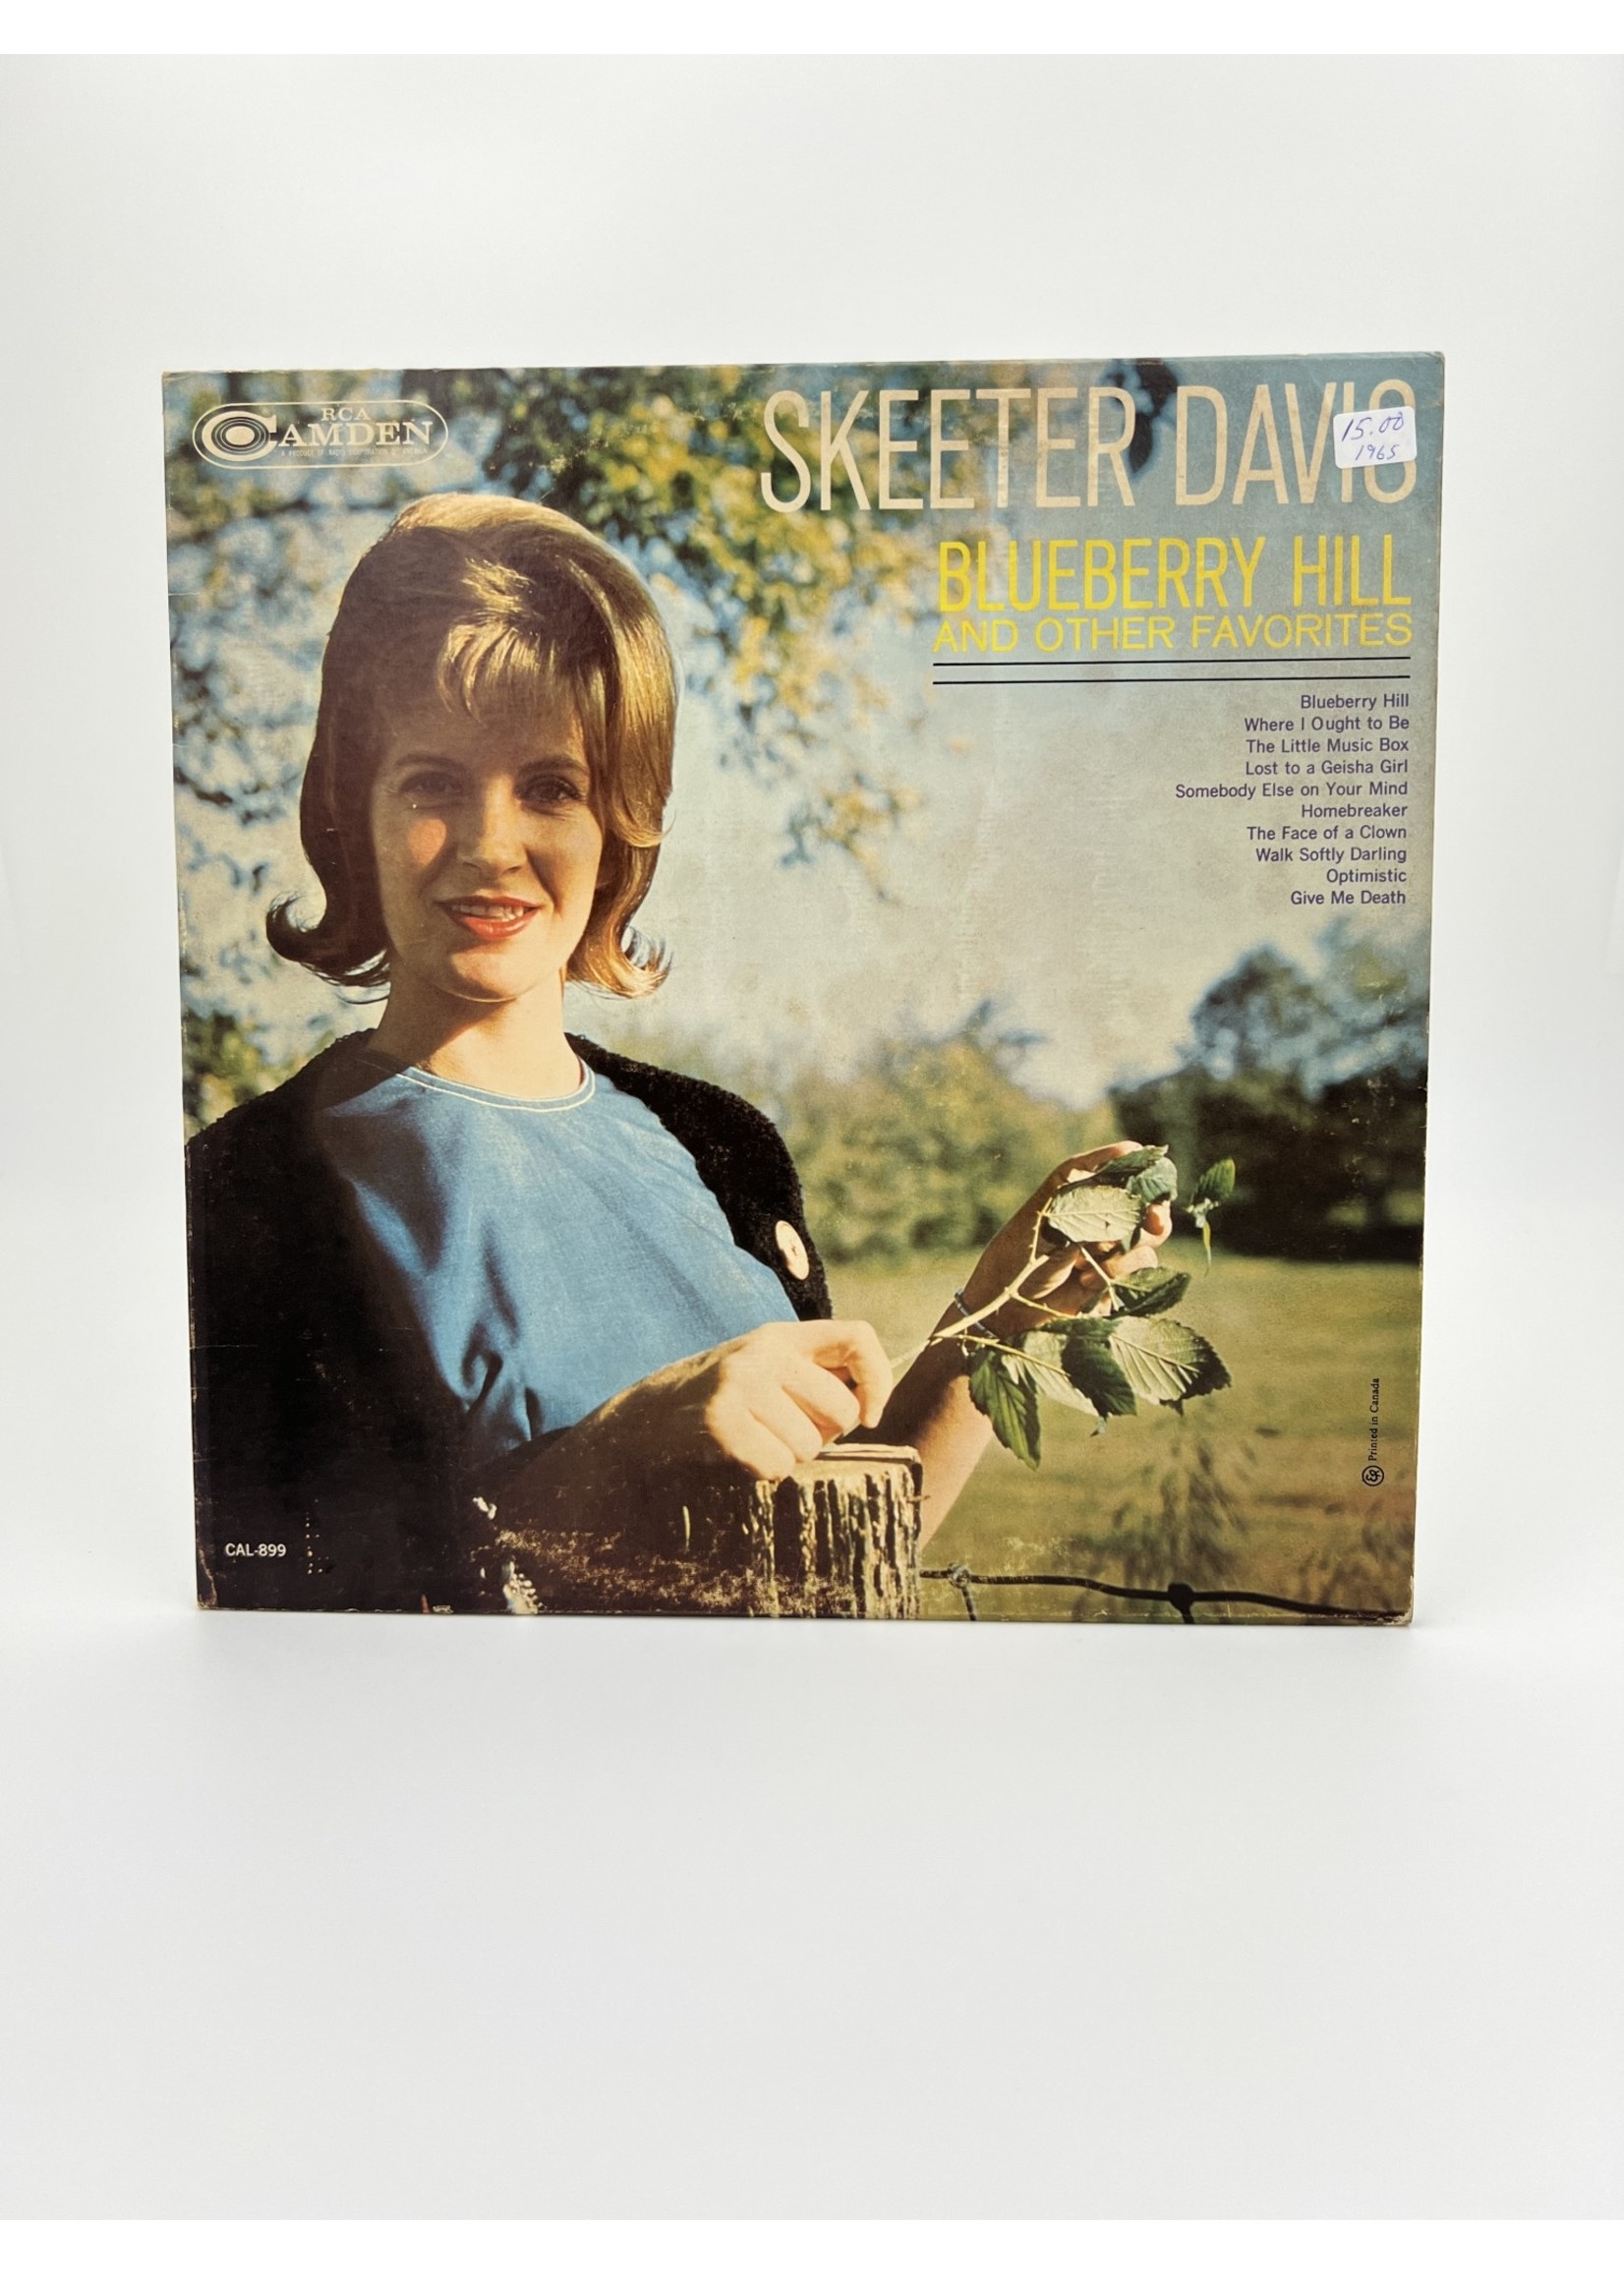 LP Skeeter Davis Blueberry Hill And Other Favorites Lp Record